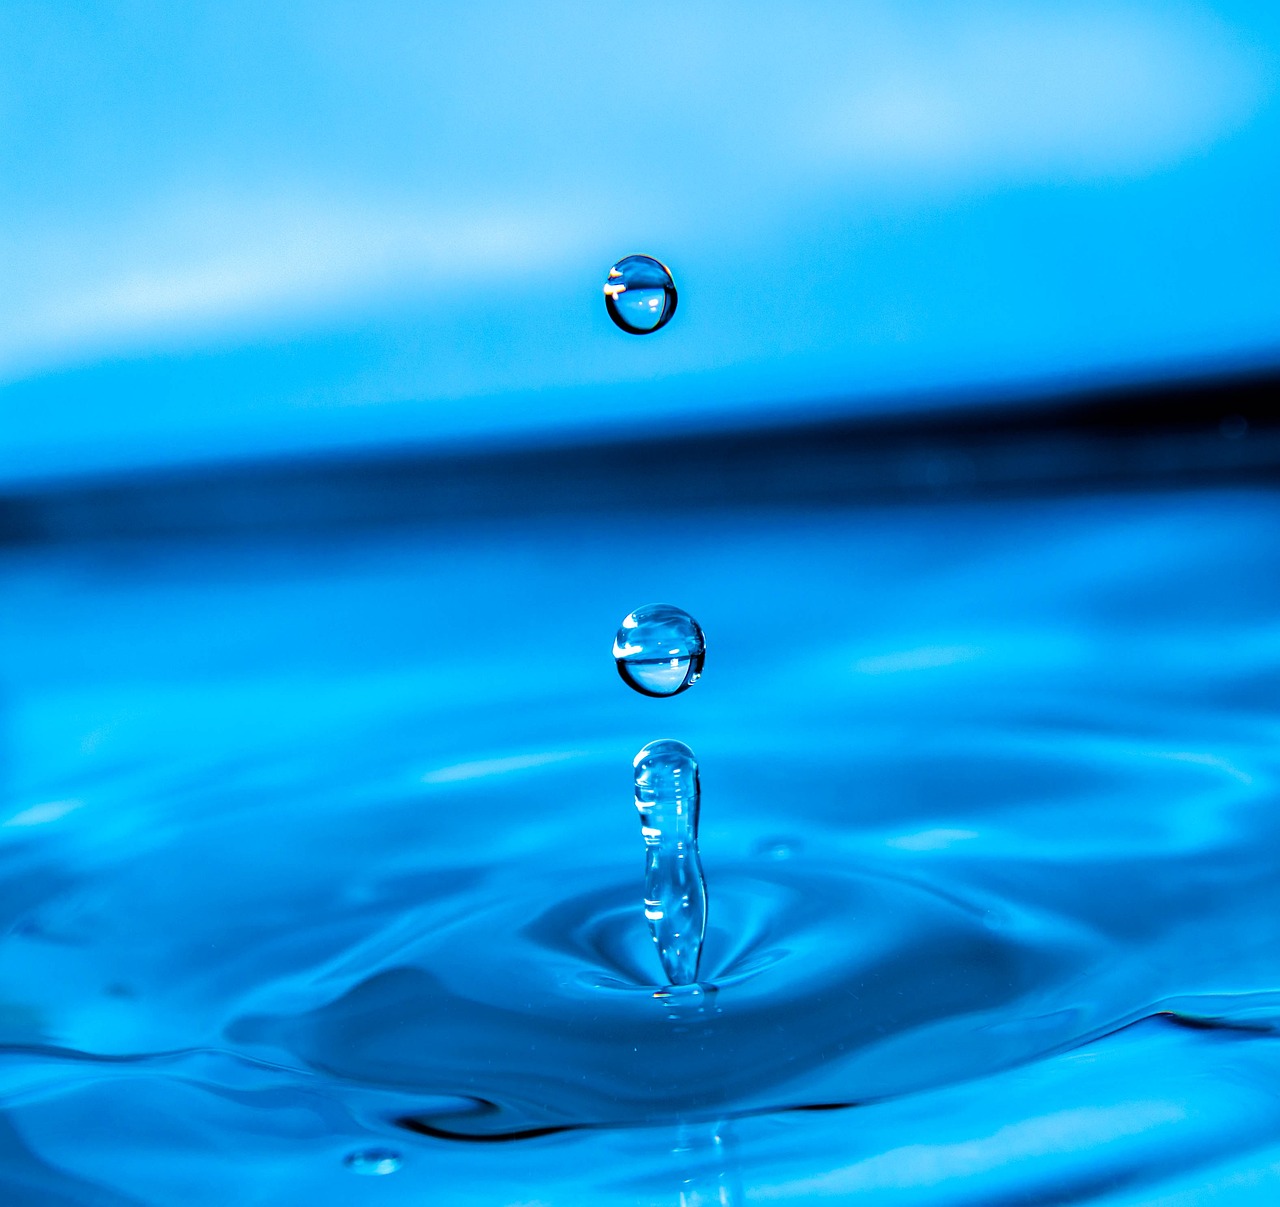 a drop of water falling into a blue pool, a macro photograph, shutterstock, hyper detailed background, stock photo